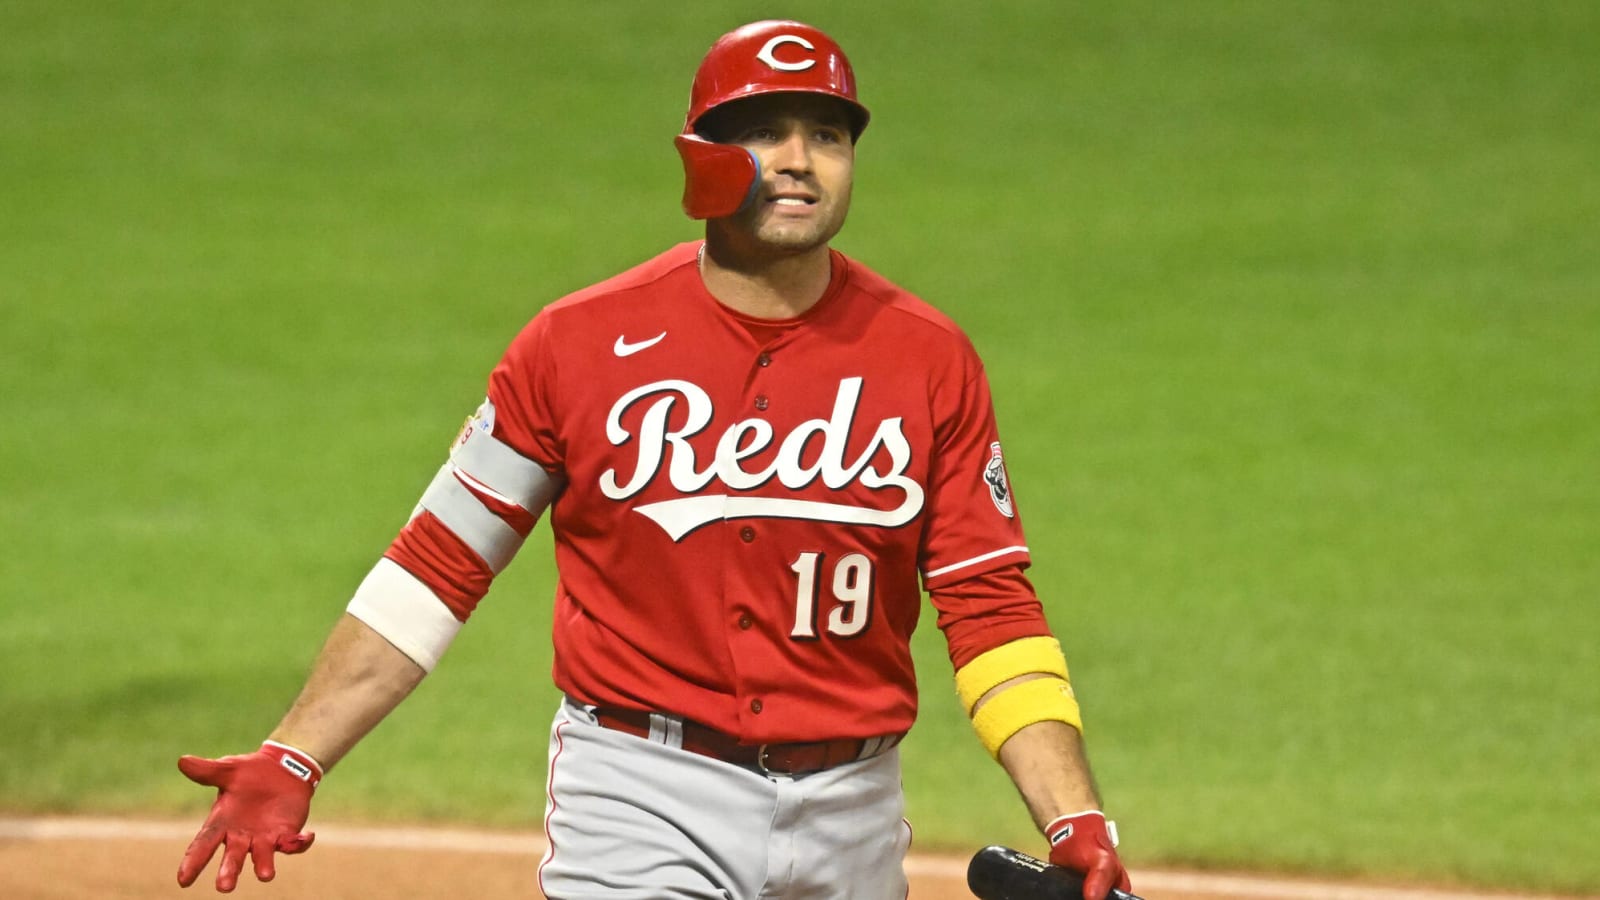 Joey Votto to attend spring training with AL team